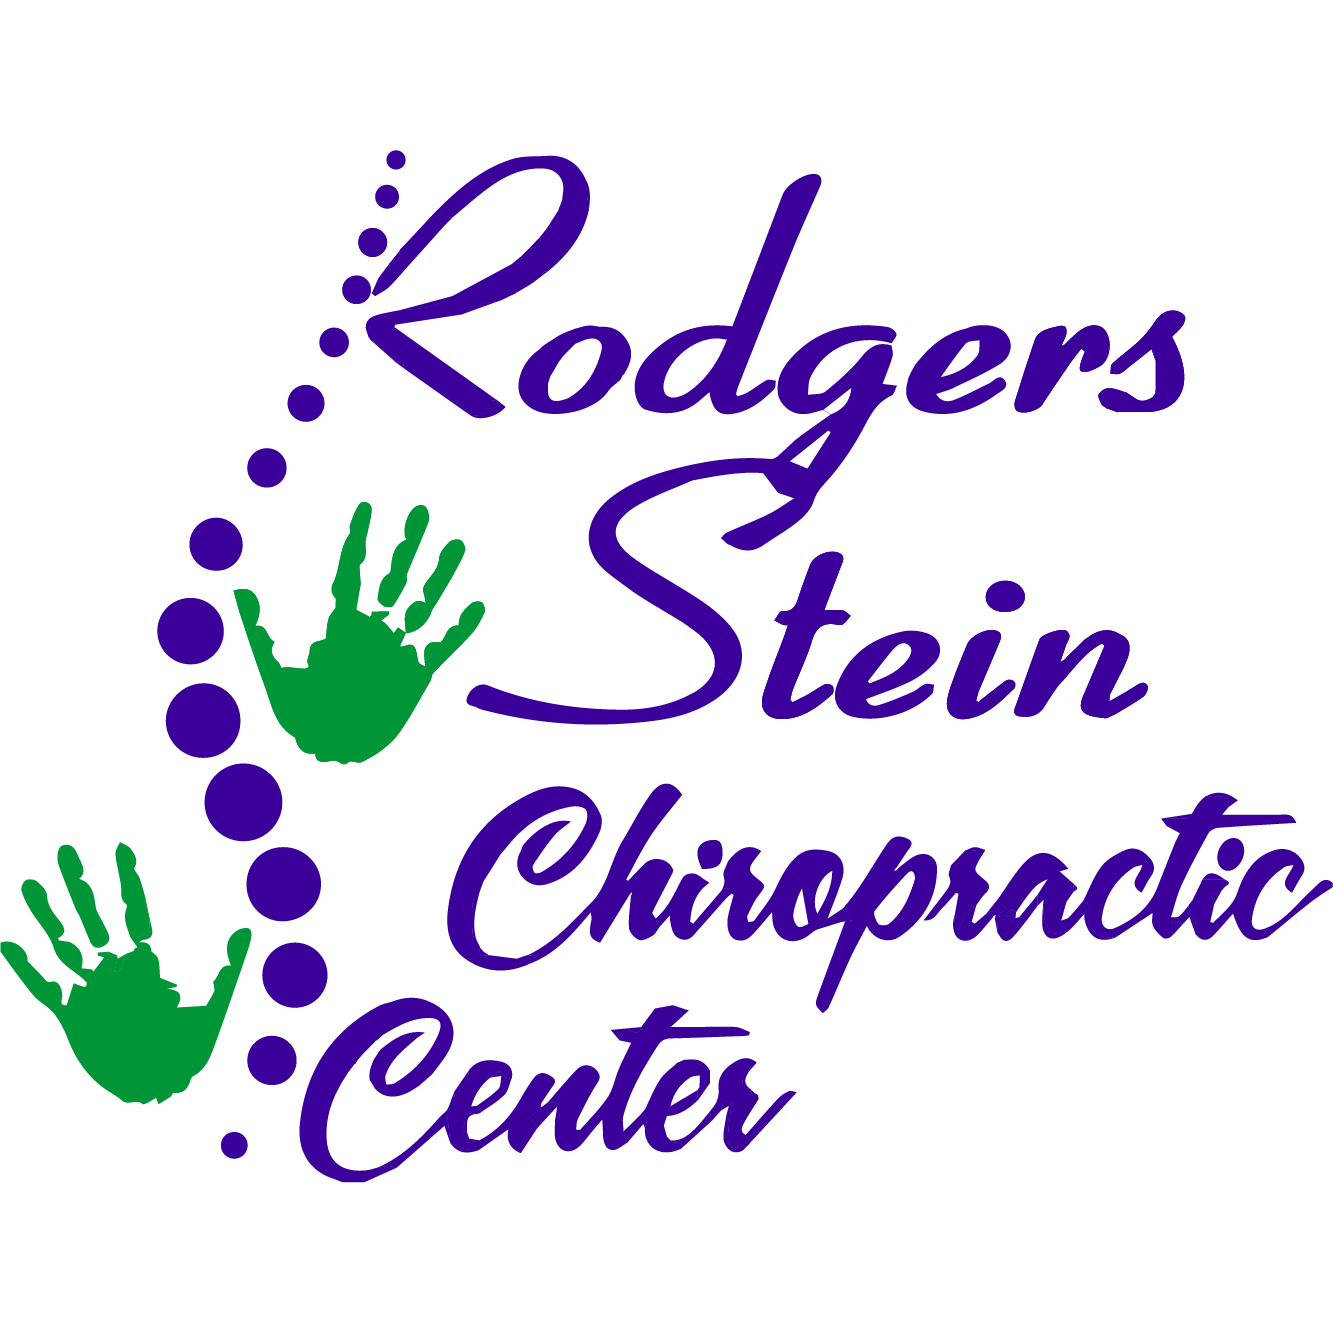 Rodgers Stein Chiropractic Center - Conroe, TX 77304 - (936)441-9990 | ShowMeLocal.com